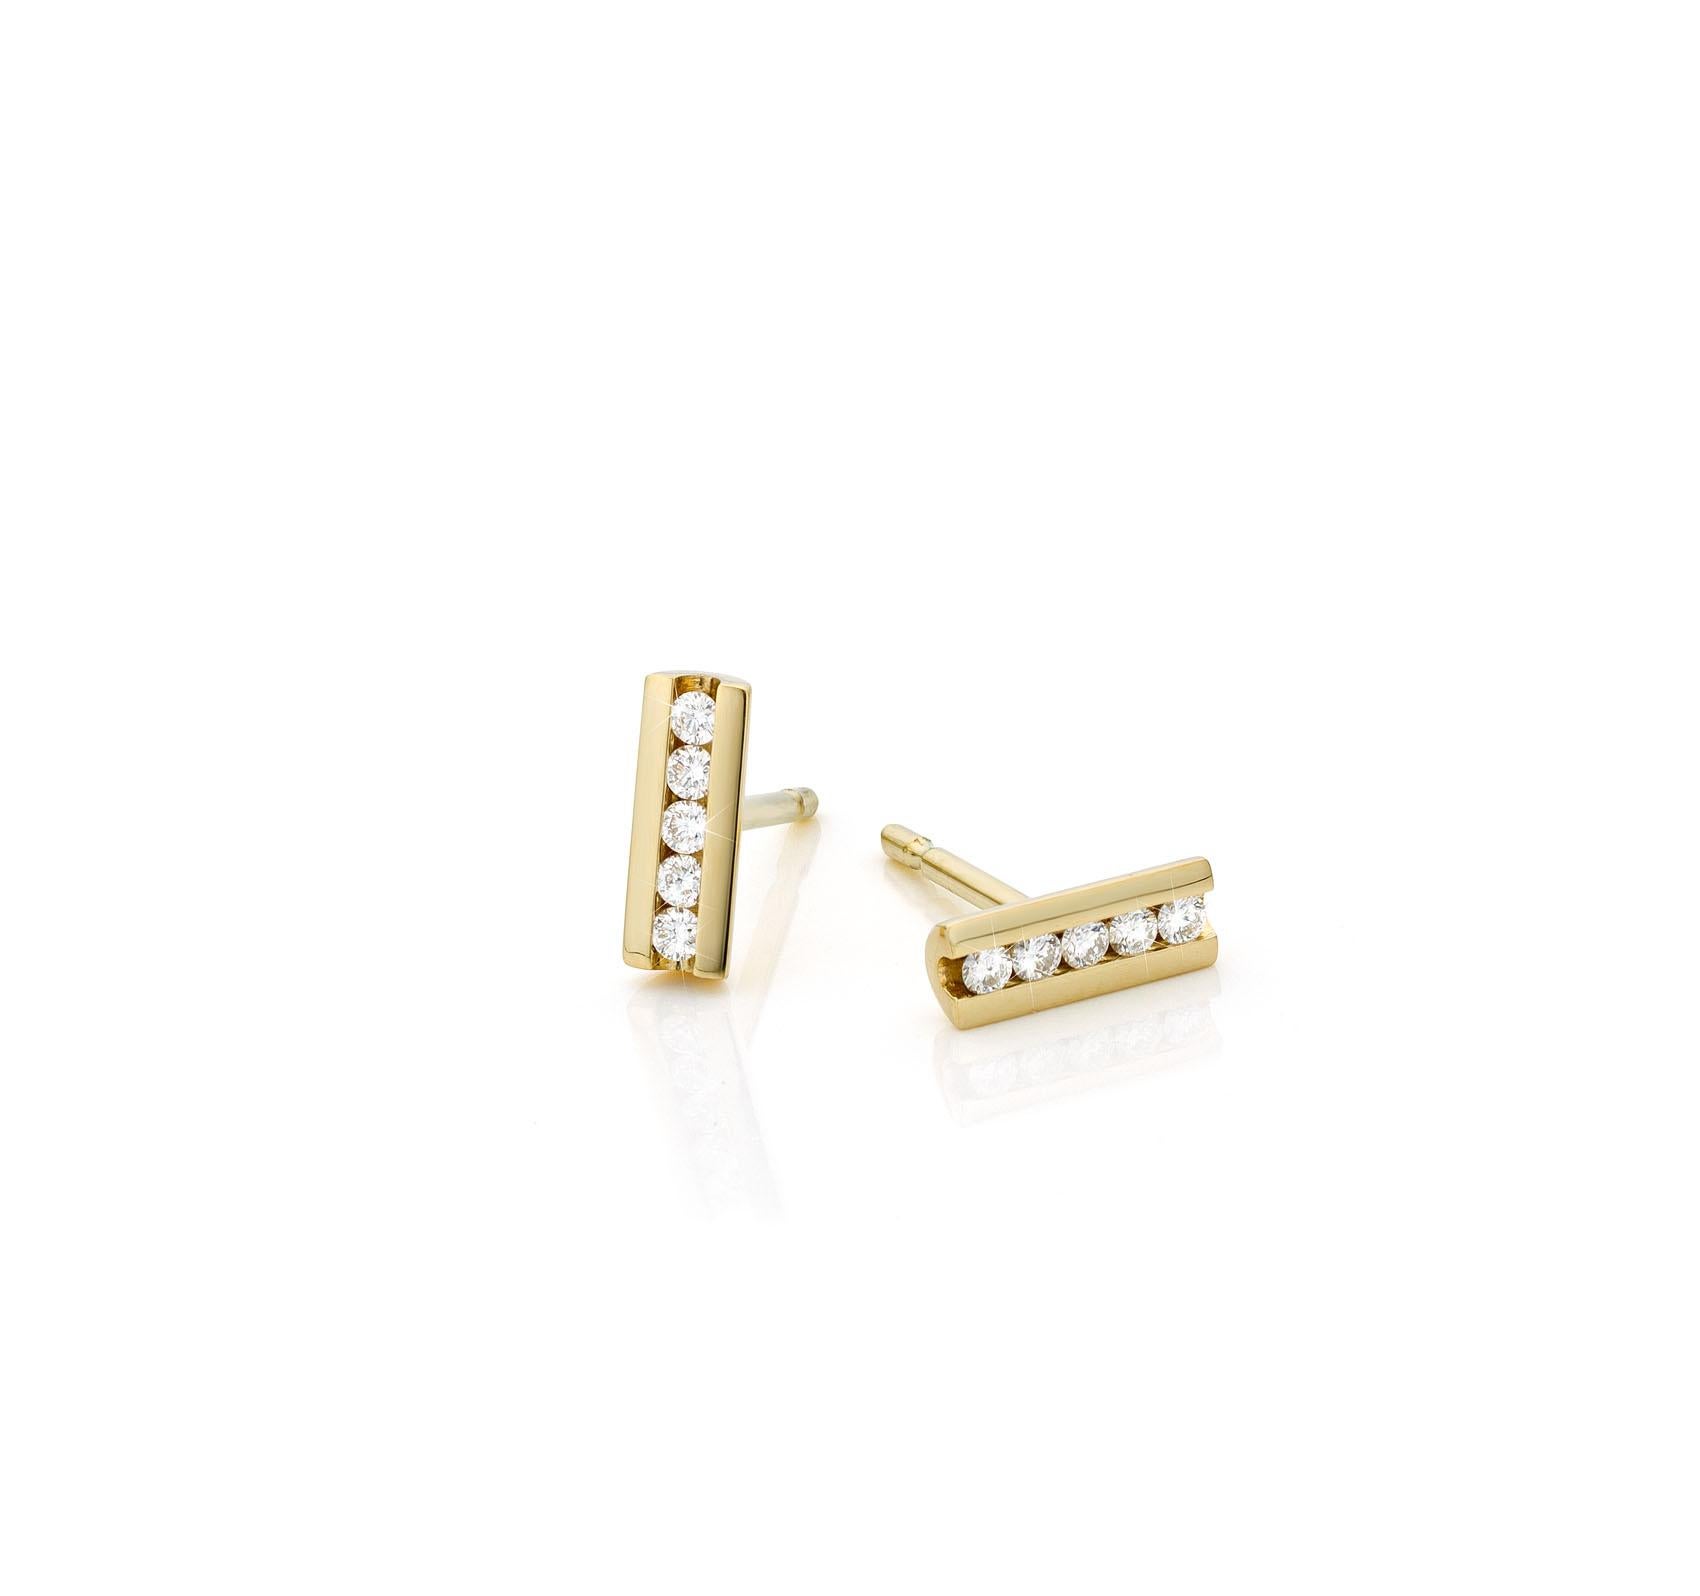 Contemporary Cober “Tube” 14 Carat Yellow Gold set with 5 x 0.01 Carat Diamonds Stud Earrings For Sale